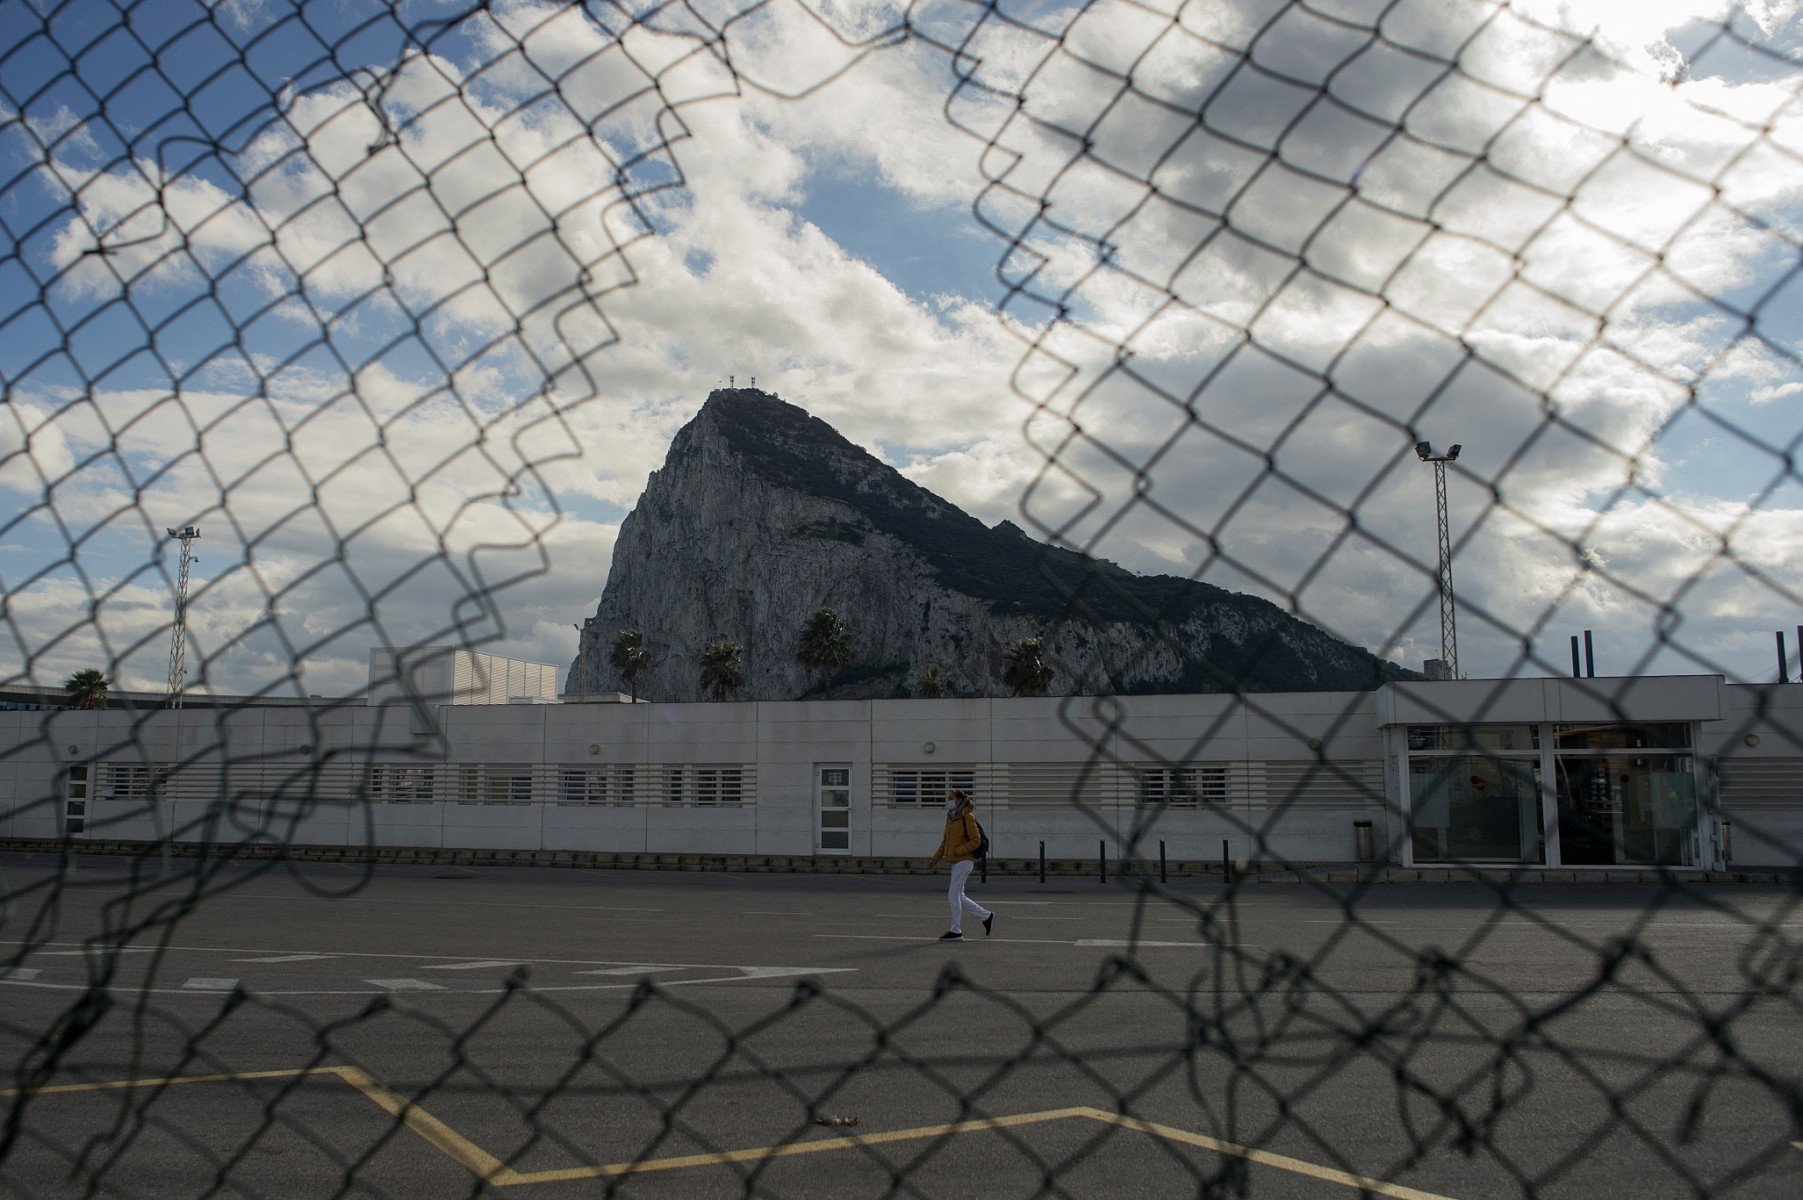 UK soldiers expelled from Spain after crossing from Gibraltar posing as tourists thumbnail